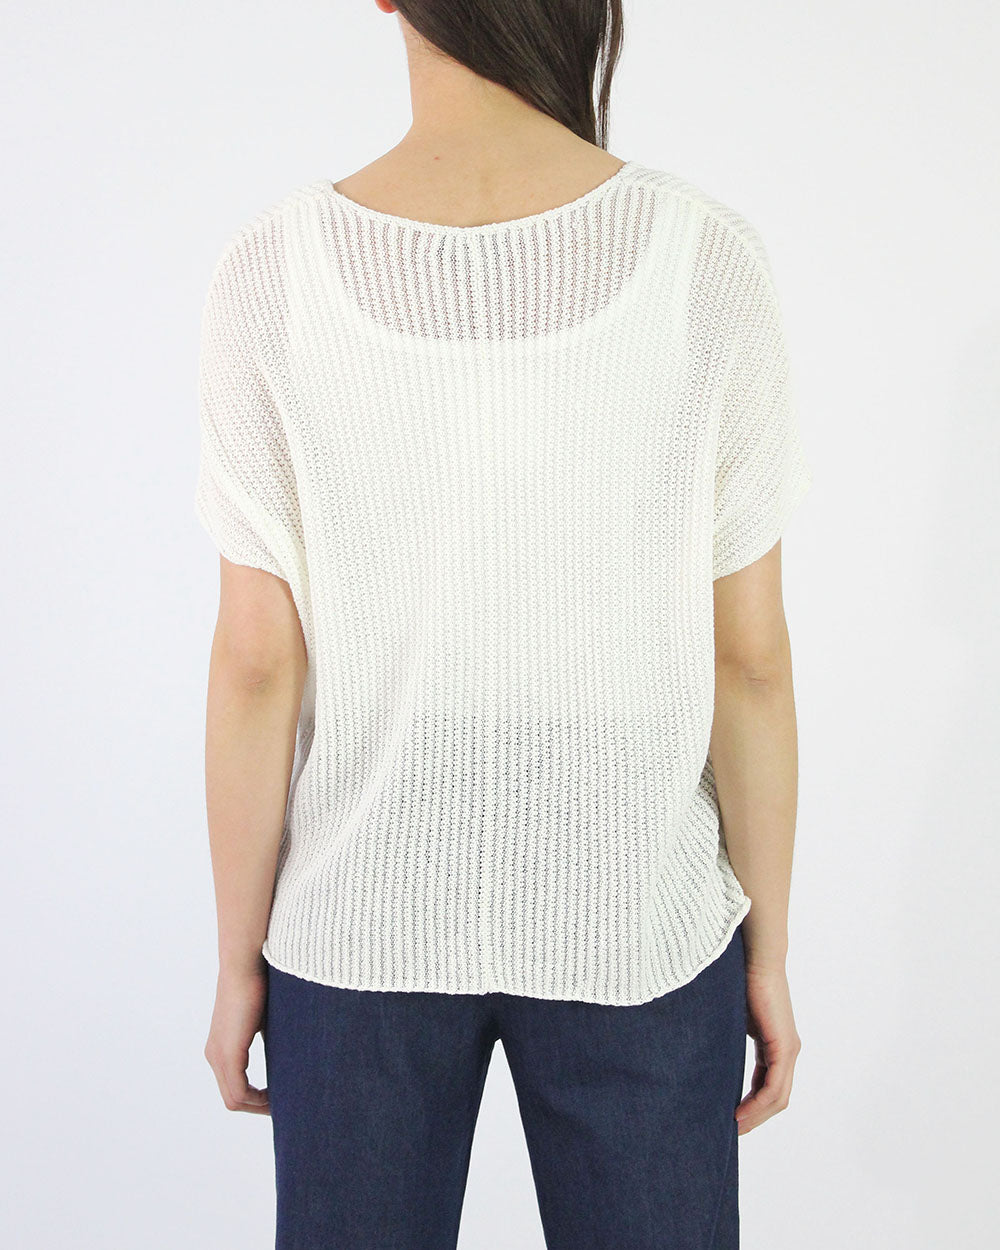 Cannelli Cotton Bamboo Blend Knit Tee